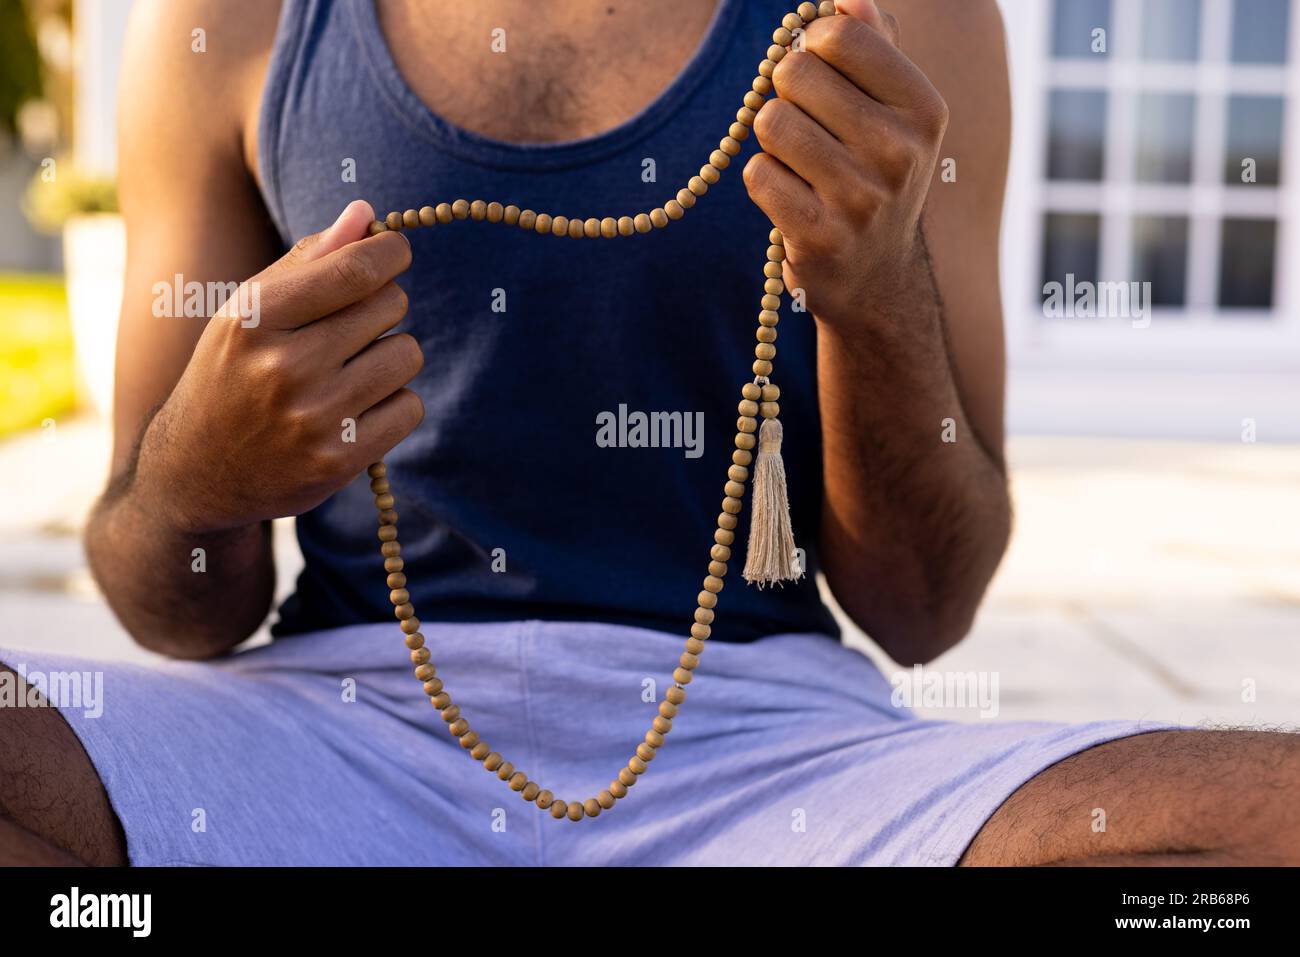 https://c8.alamy.com/comp/2RB68P6/midsection-of-biracial-man-practicing-yoga-meditation-sitting-in-sunny-garden-holding-beads-mala-beads-summer-wellbeing-fitness-and-healthy-lifest-2RB68P6.jpg